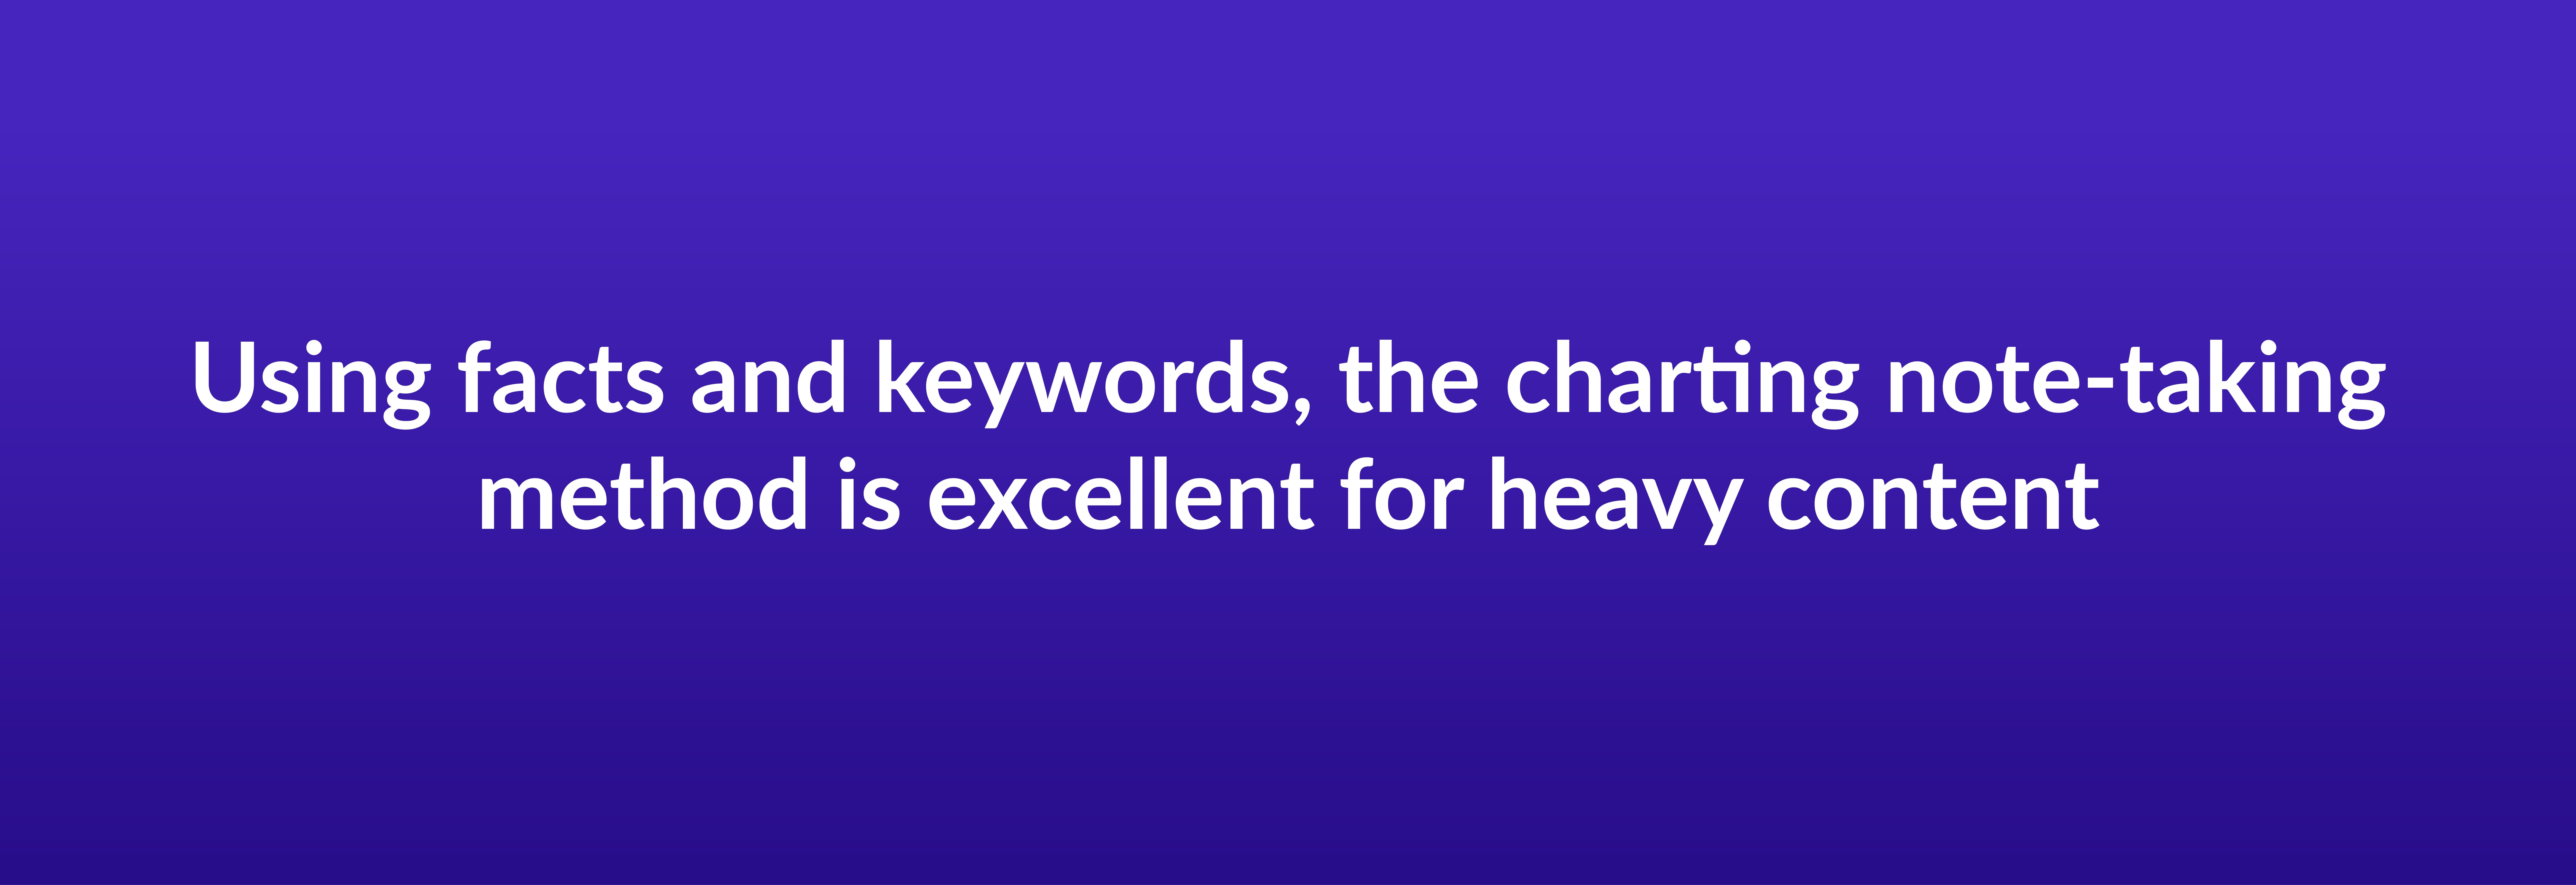 Using facts and keywords, the charting note-taking method is excellent for heavy content